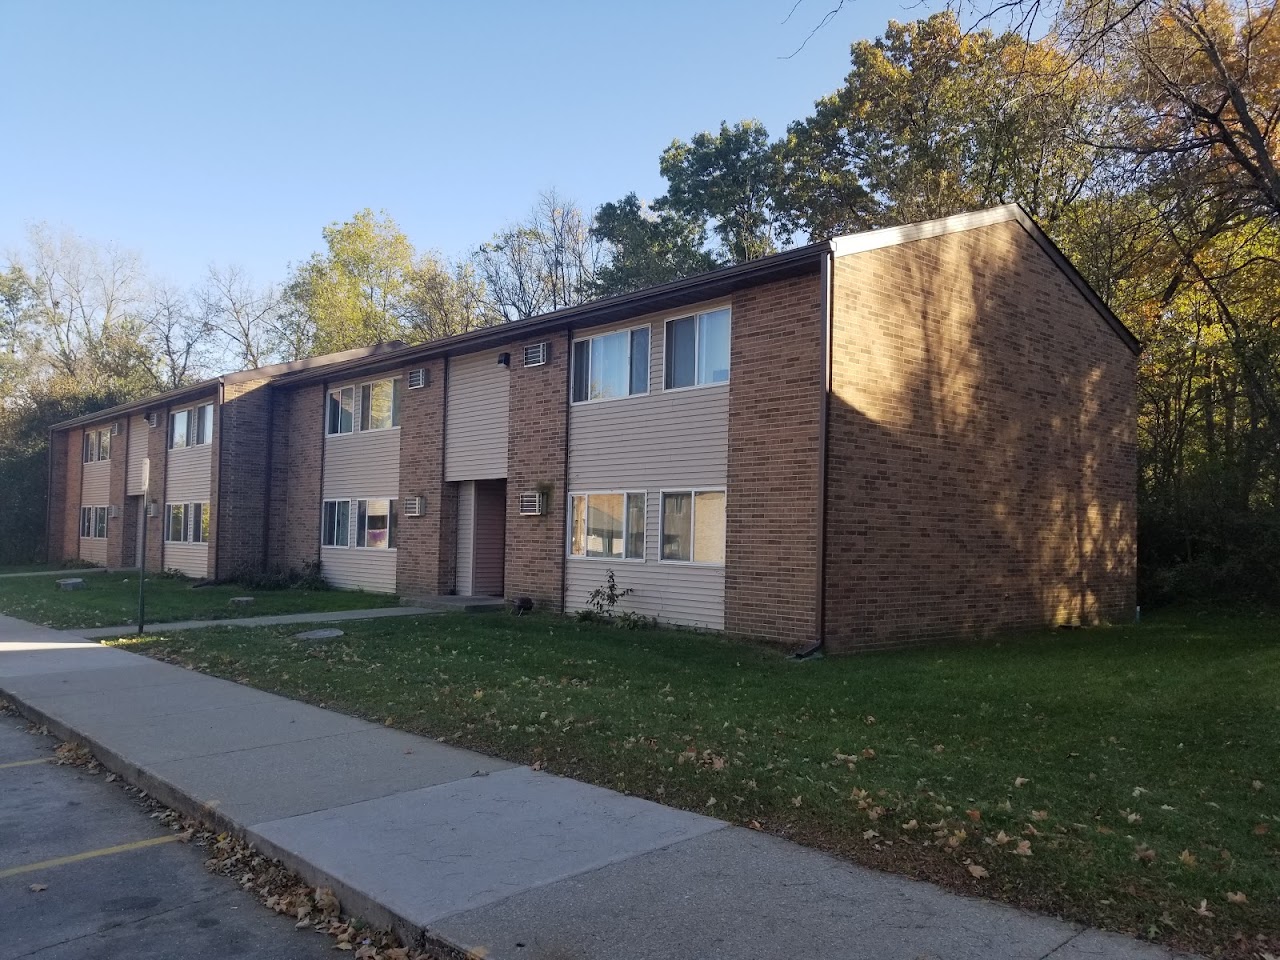 Photo of CEDAR PARK APTS. Affordable housing located at 1816 LOGAN ST MUSCATINE, IA 52761